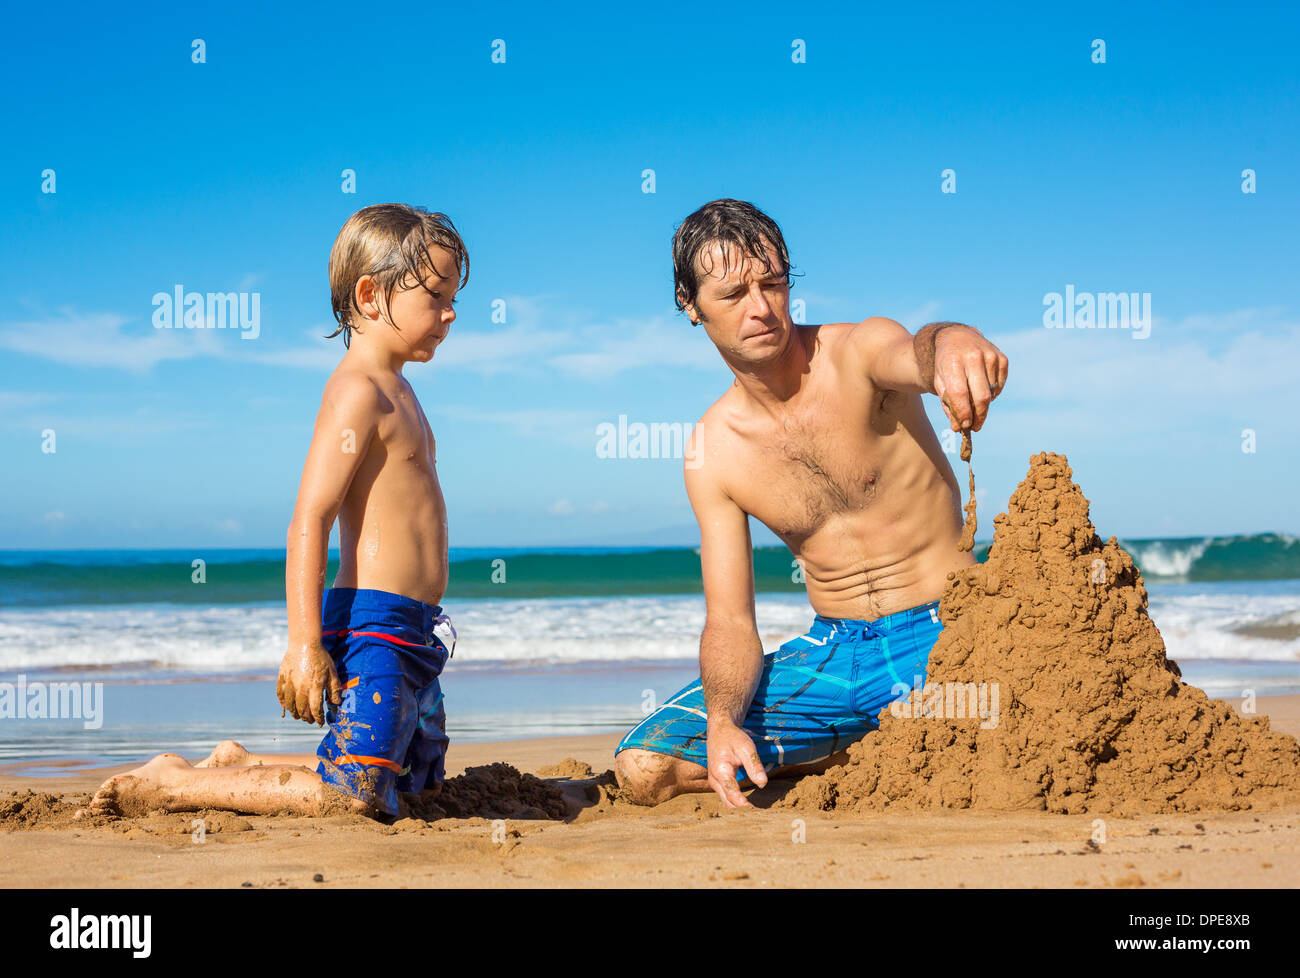 Father And Son Playing Together In The Sand On Tropical Beach Stock